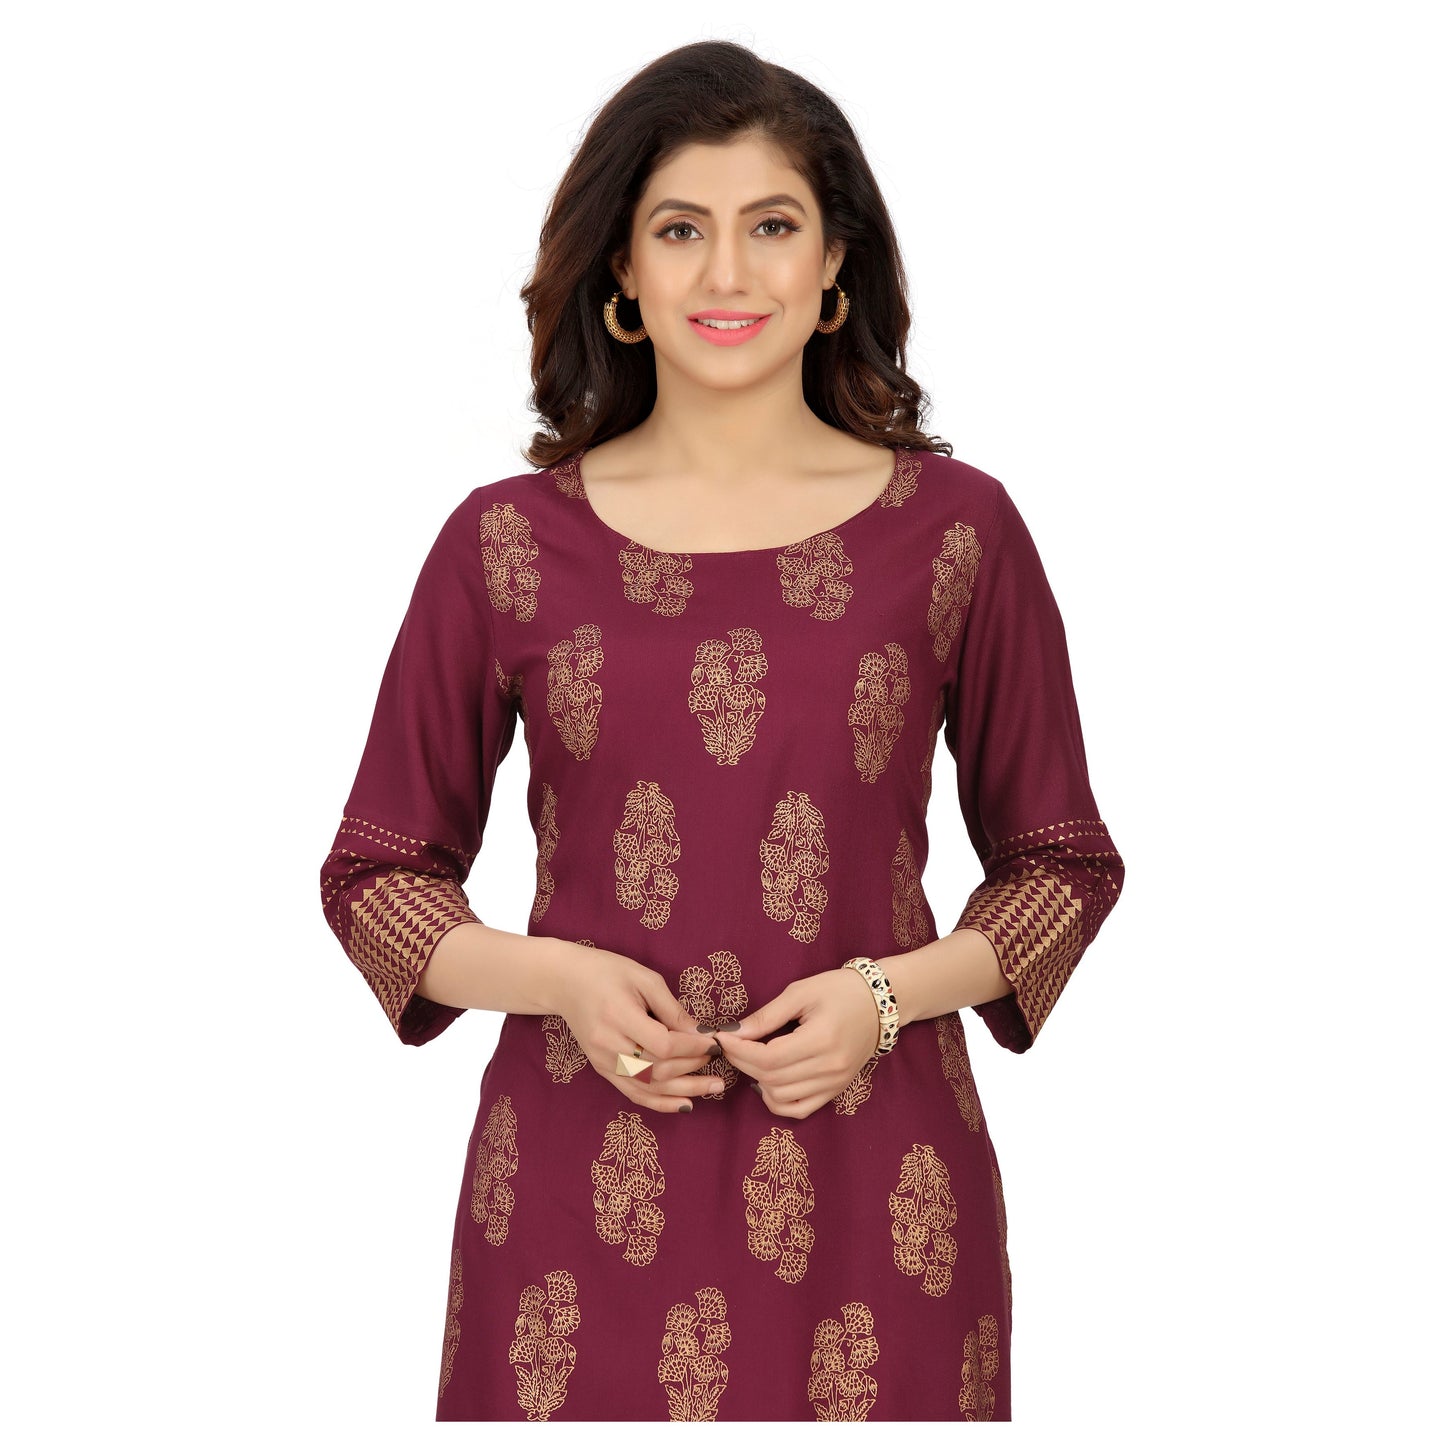 Wine color Kurta with pretty gold prints all over and details on the sleeve. Soft rayon fabric makes this an easy breezy choice as temple wear, family dinner or indian festivals. 